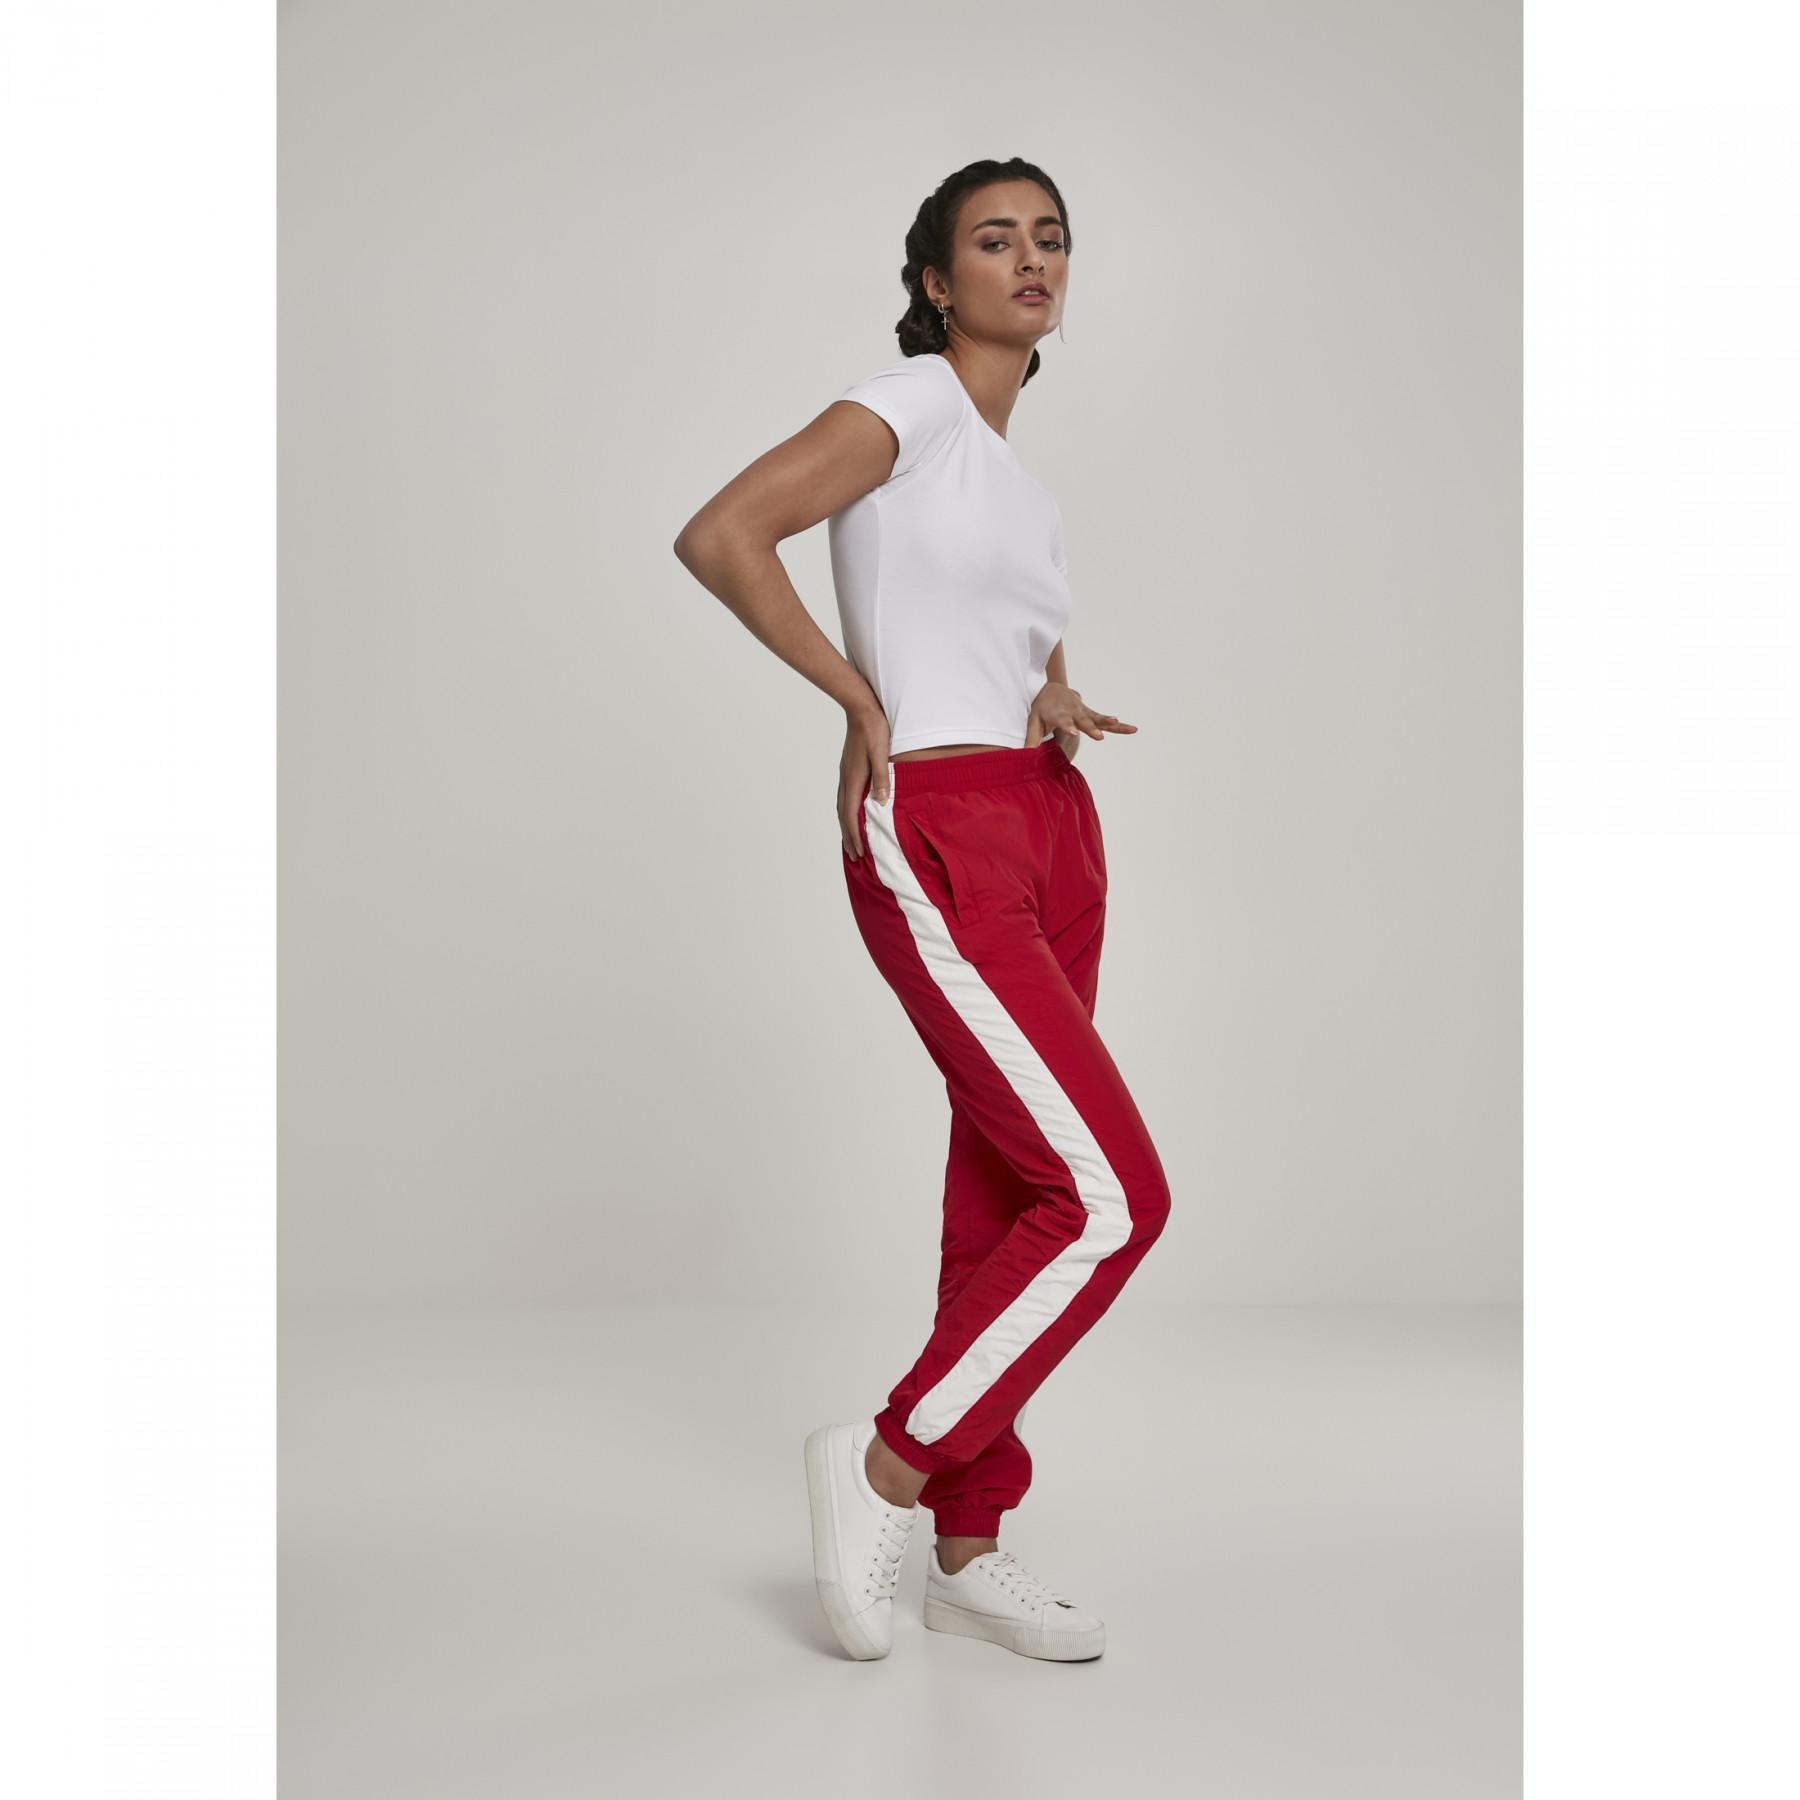 Pant woman Urban Classic striped crinkle GT